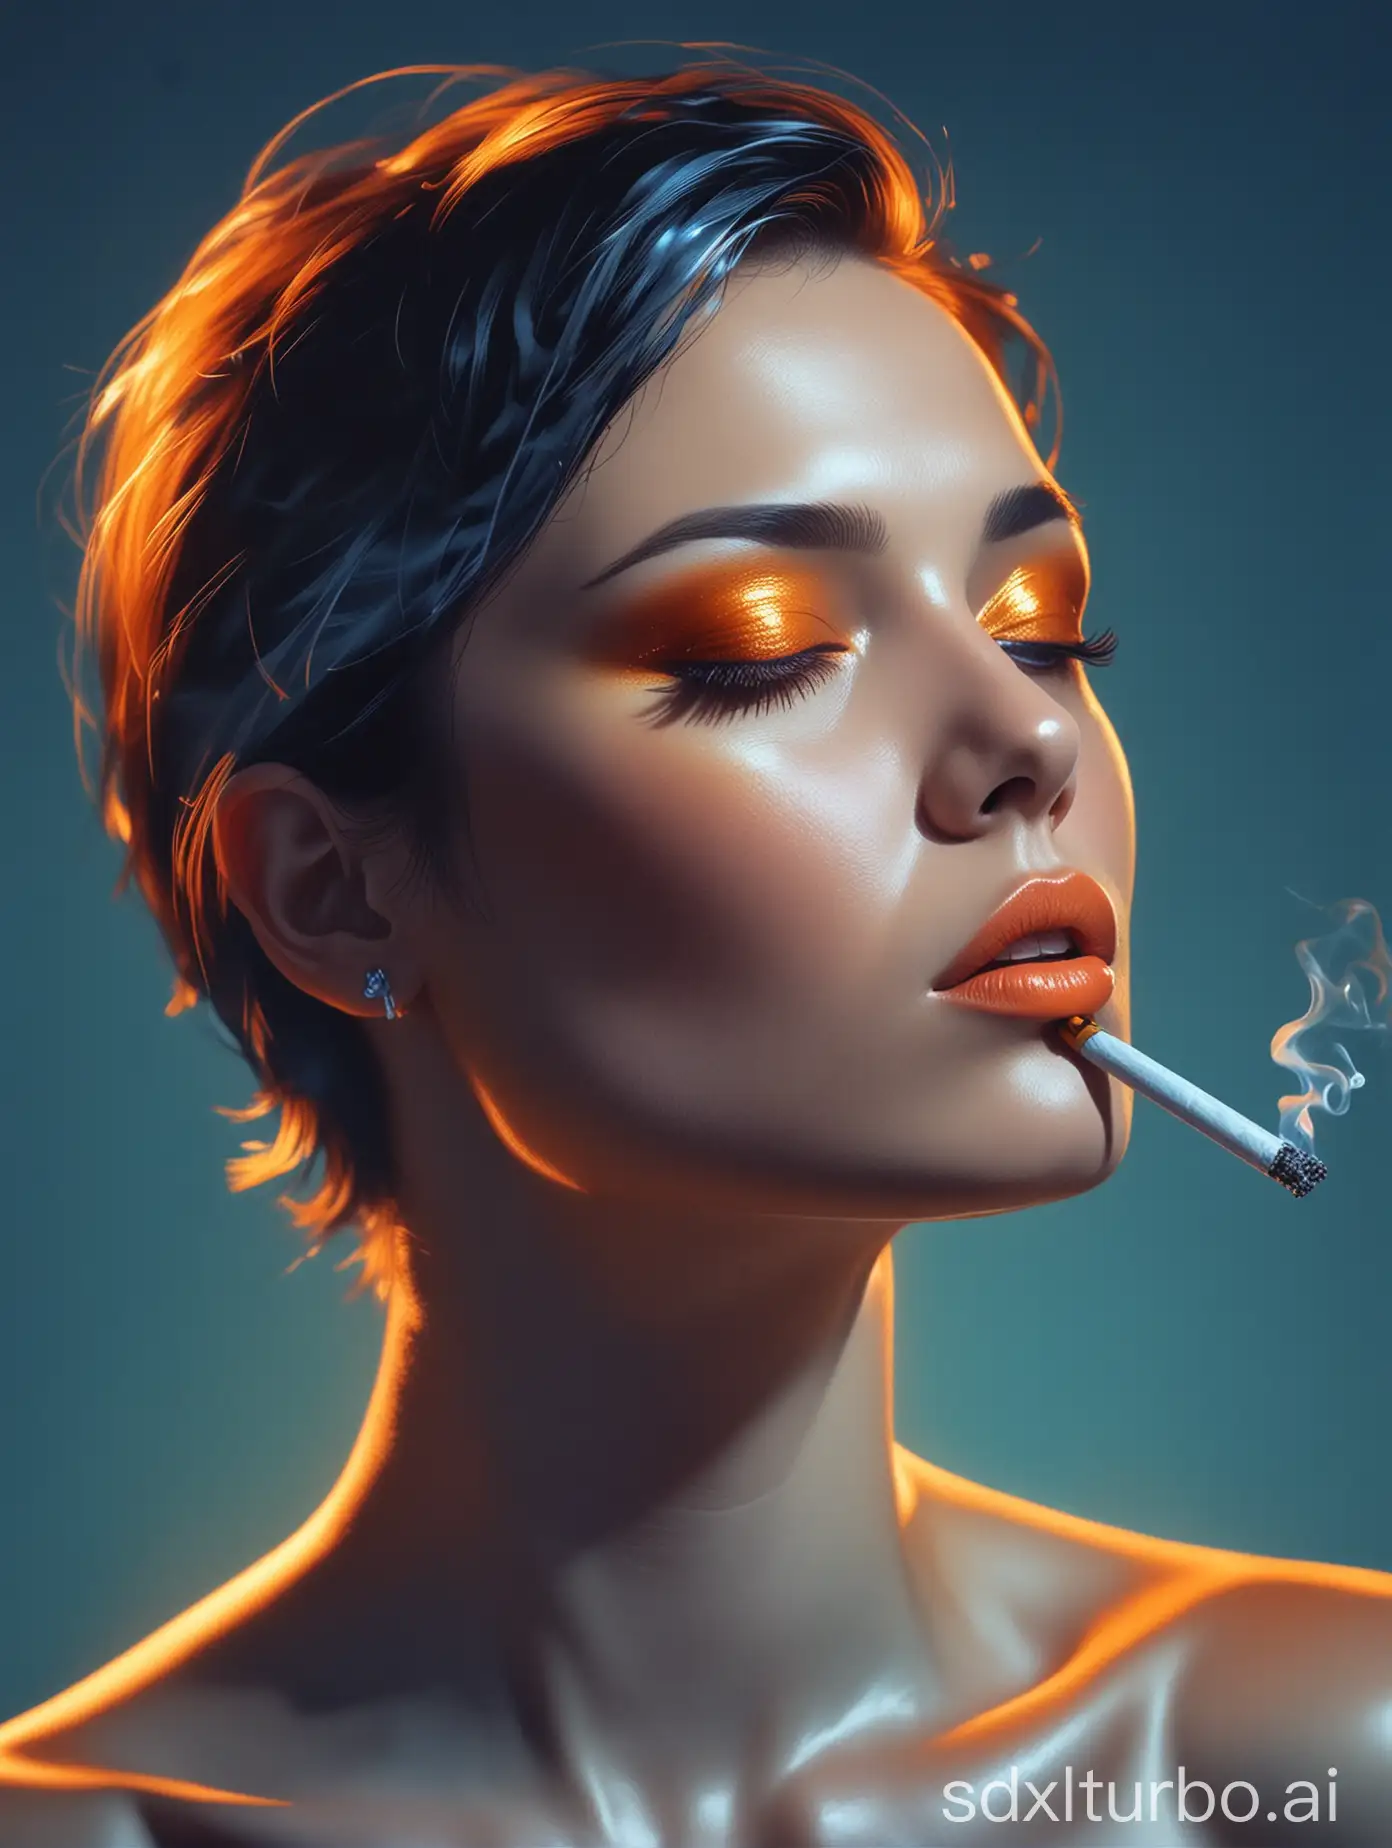 portrait of a chrome womans head, smoking a cigarette, blue background, orange reflections, in the style of soryama,
p